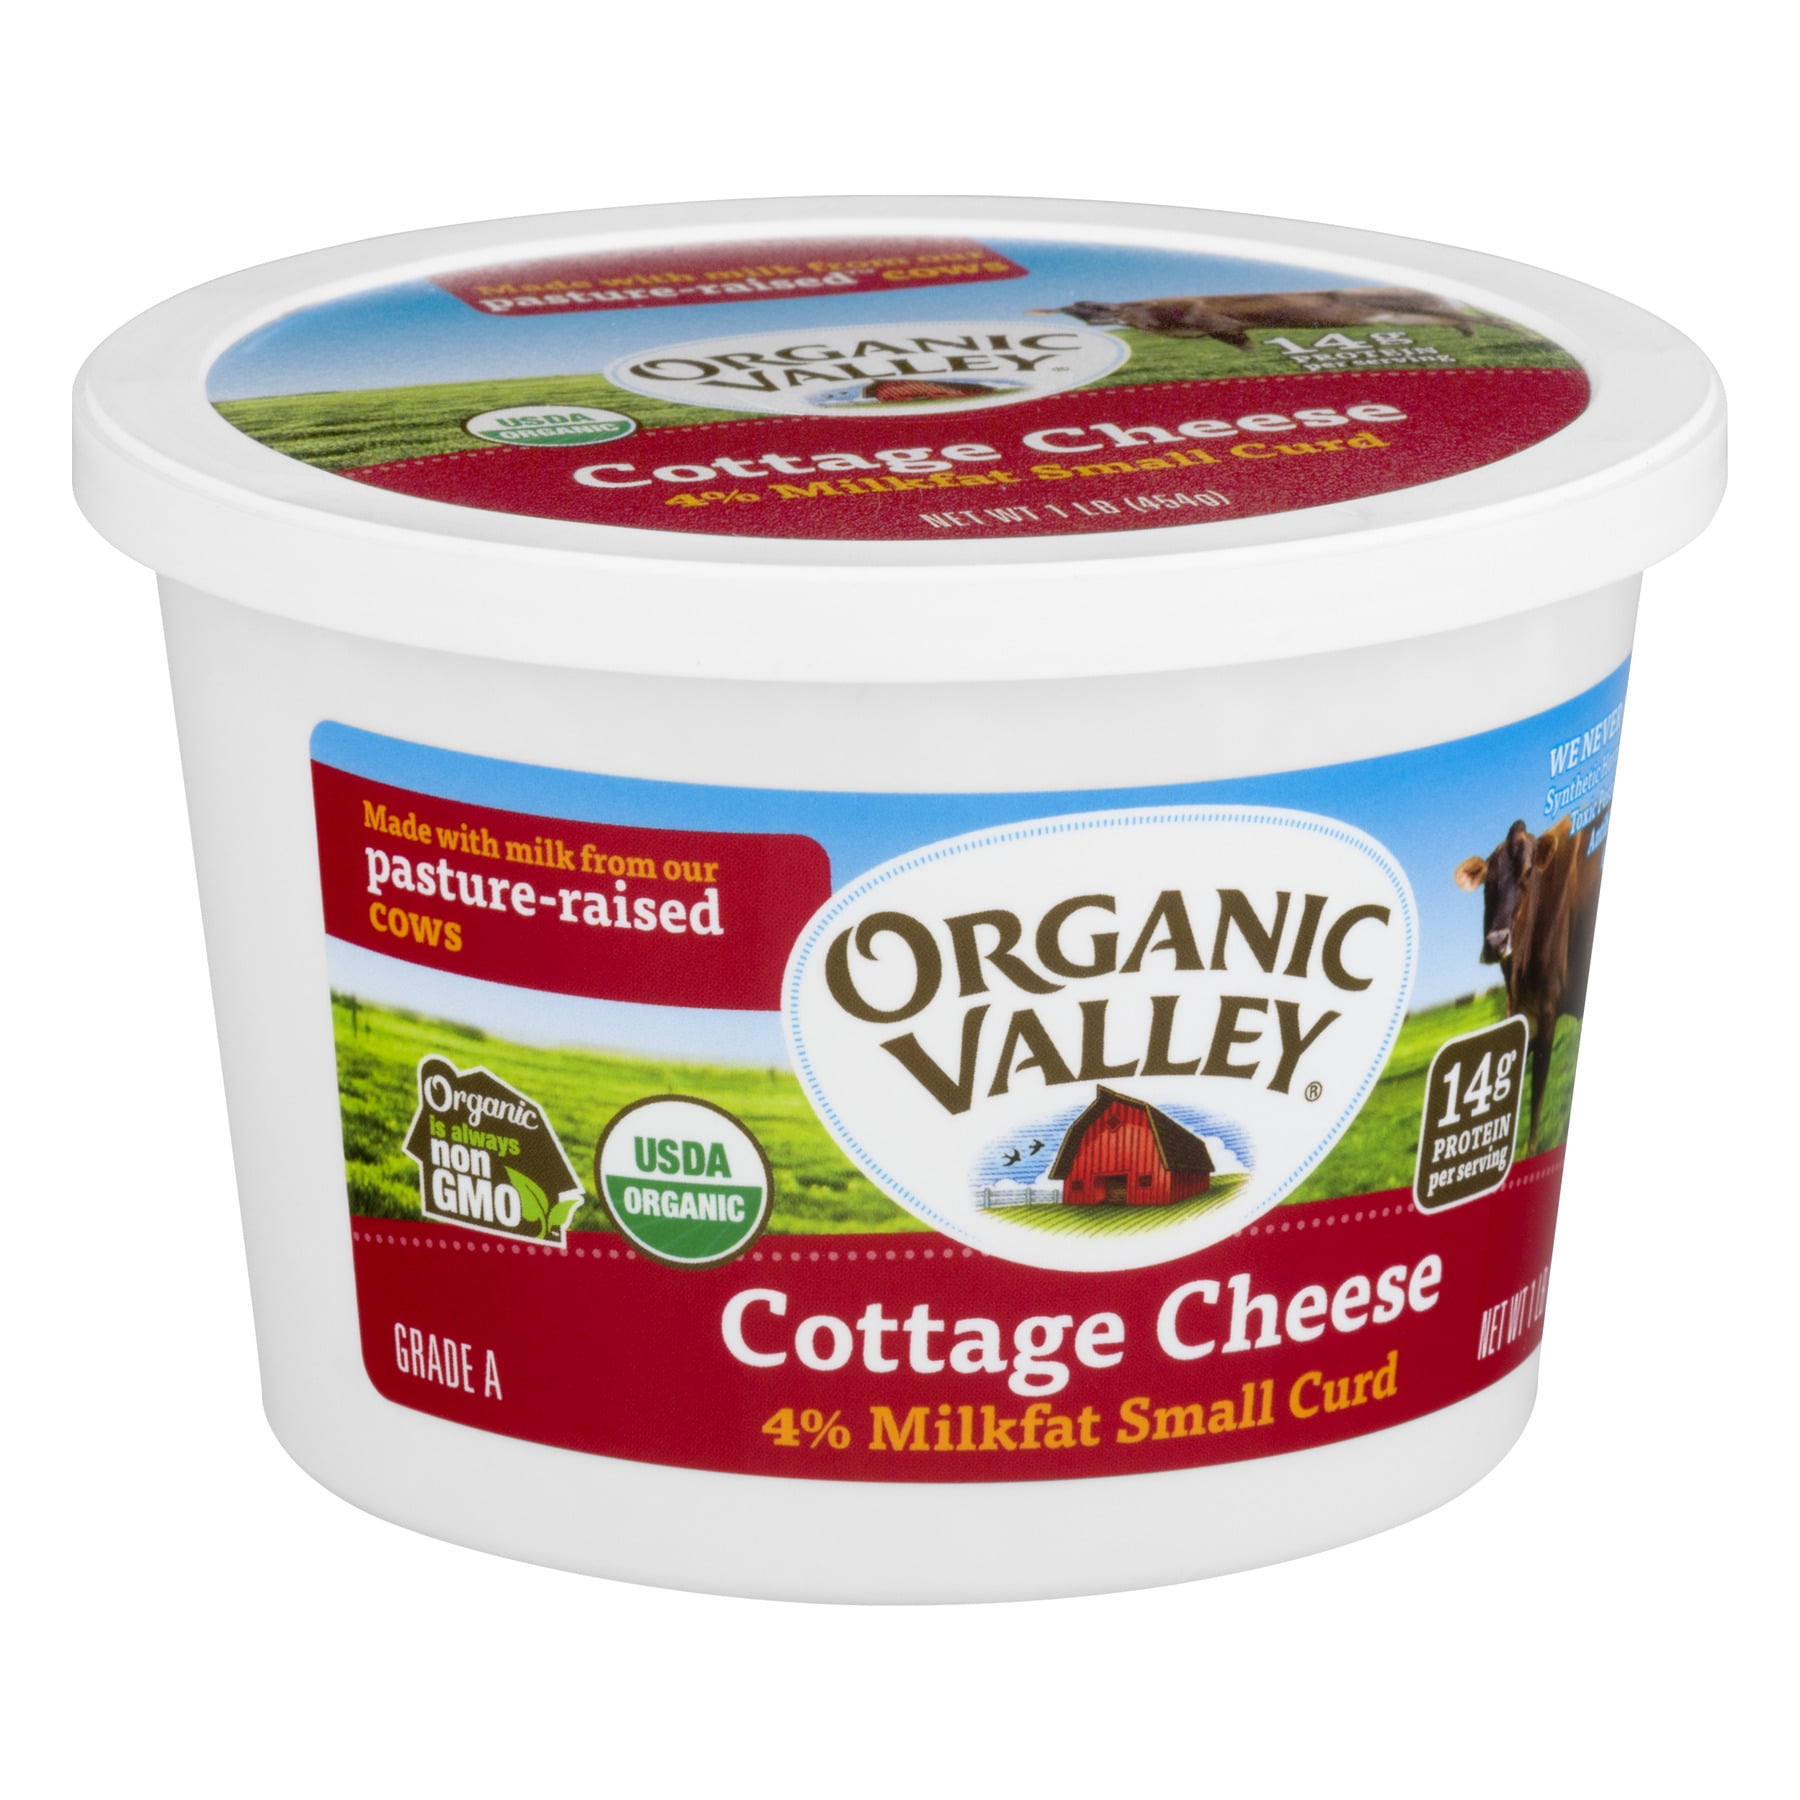 Organic Valley 4 Milk Fat Small Curd Cottage Cheese 16 Oz